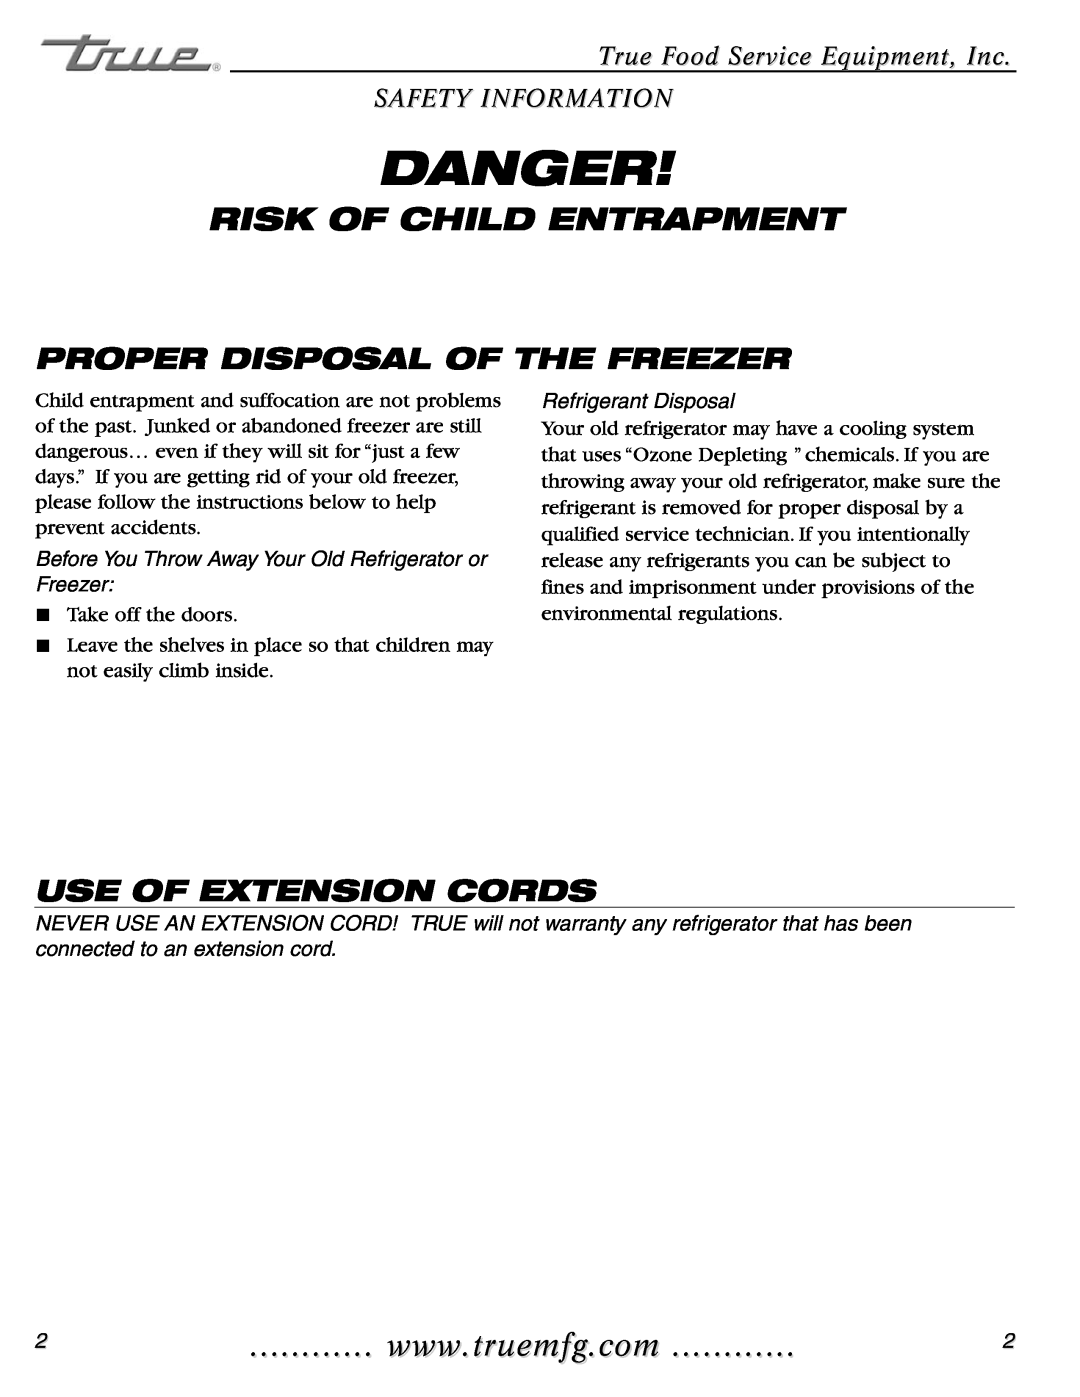 True Manufacturing Company TWT-60F Risk Of Child Entrapment, Proper Disposal Of The Freezer, Use Of Extension Cords 